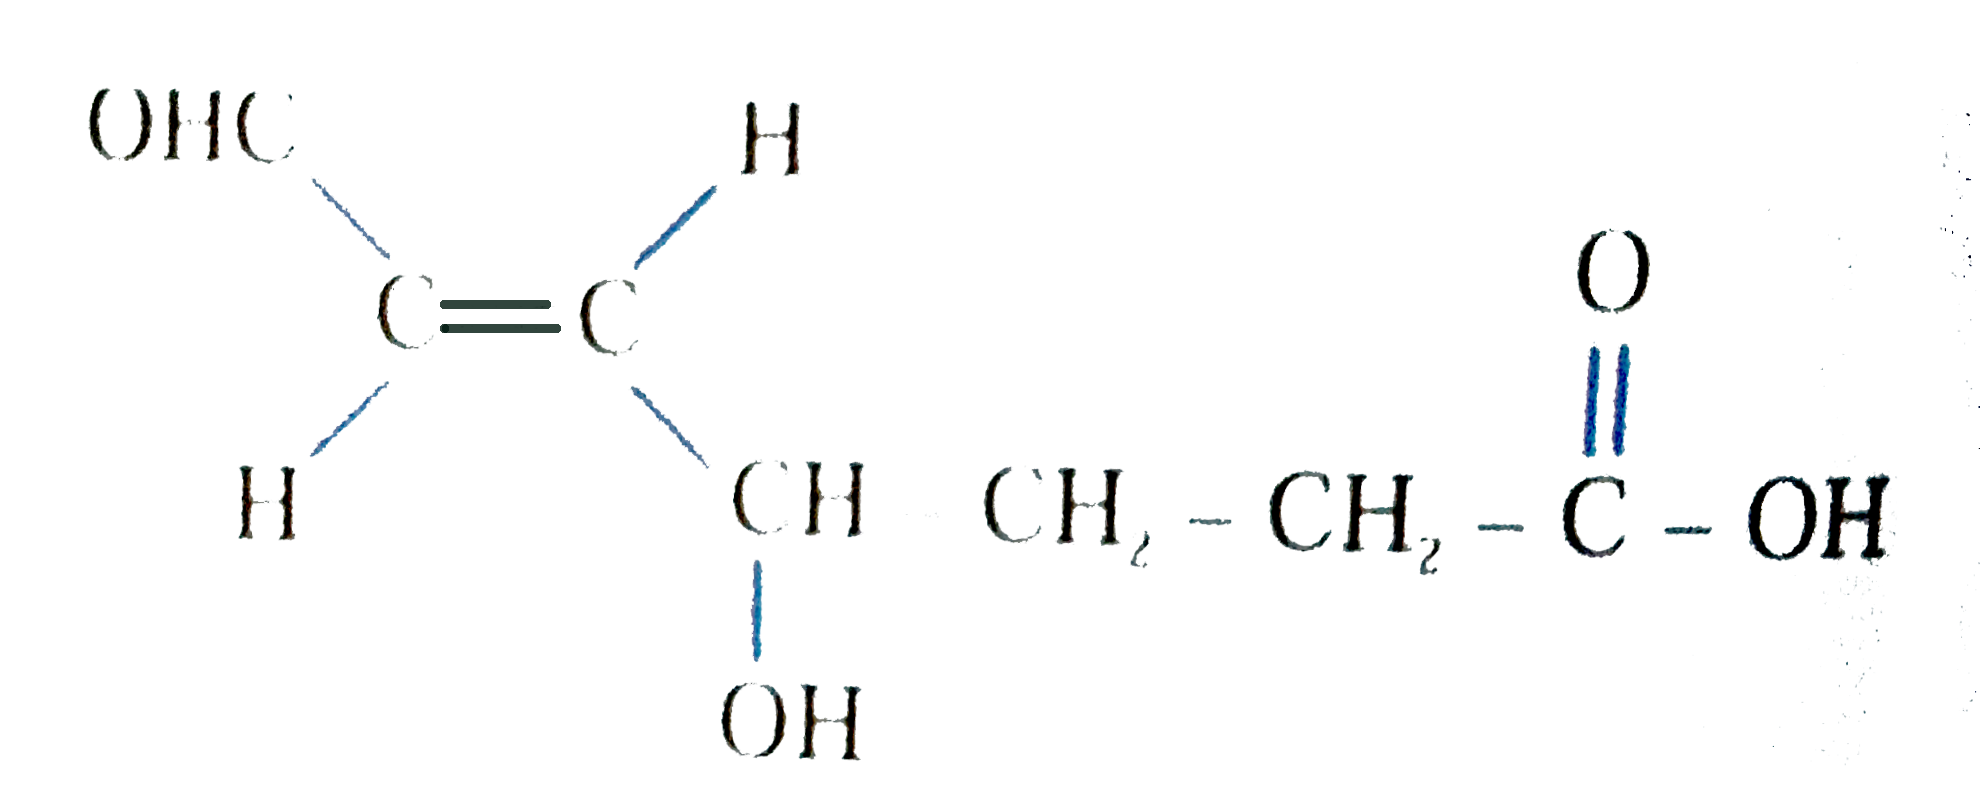 Provide IUPAC name of the compound given below.